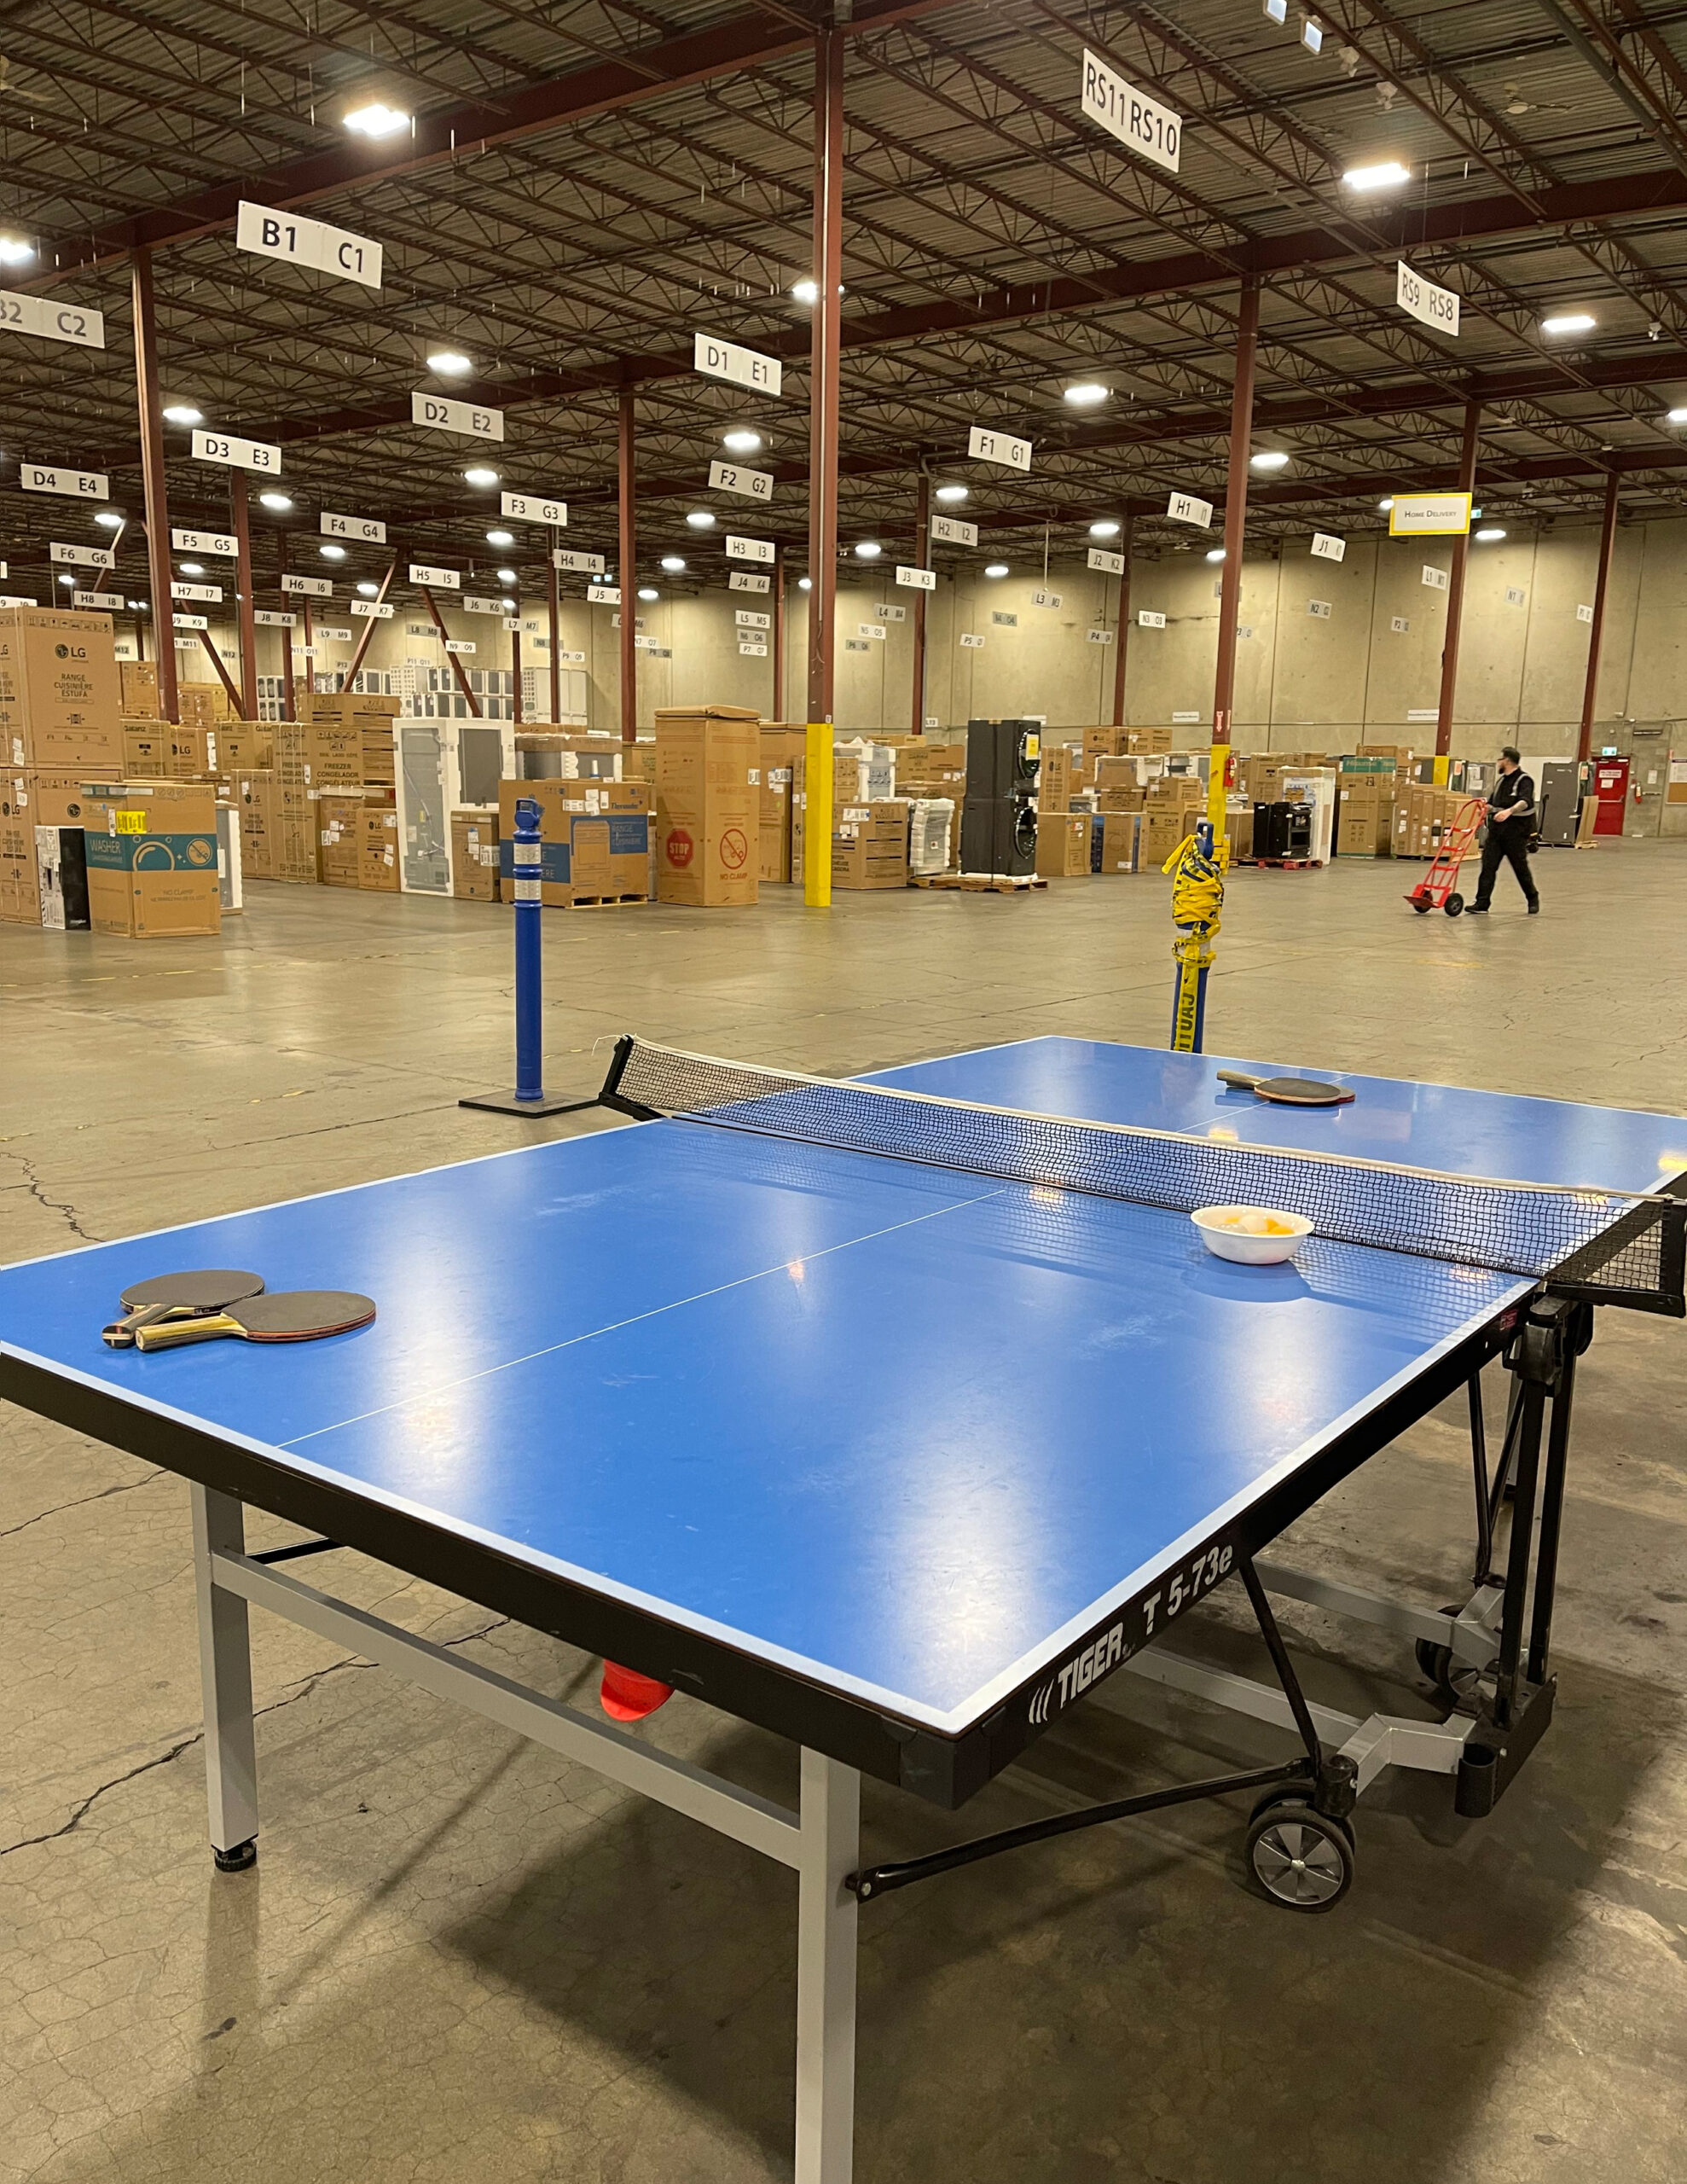 Ping Pong Table – Vancouver PartyWorks